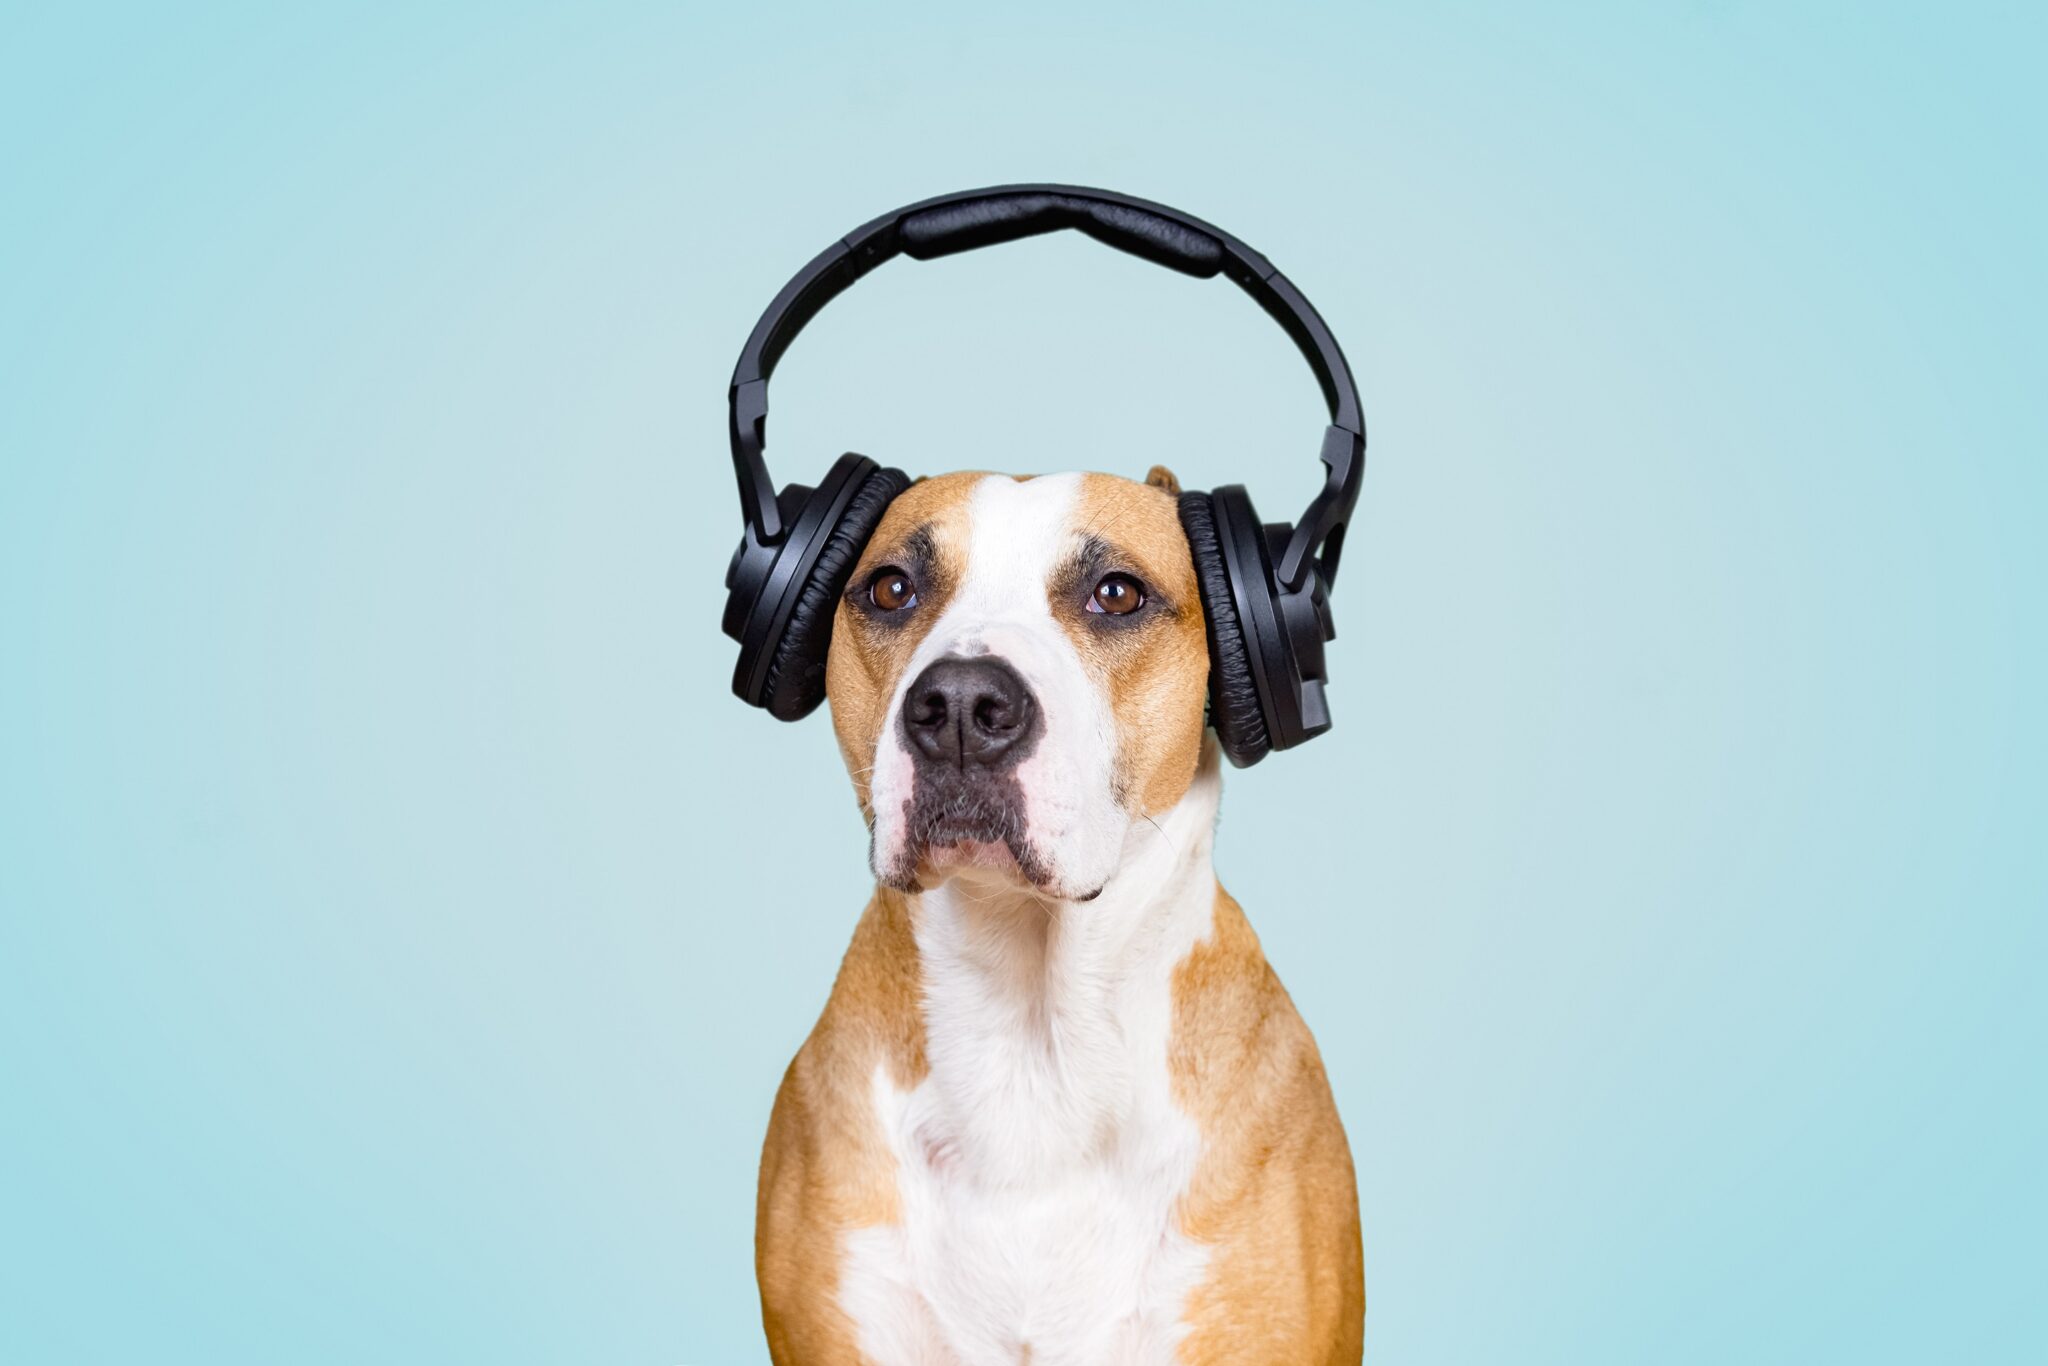 Foundation 30 million friends launches its podcast to make people aware of animal protection